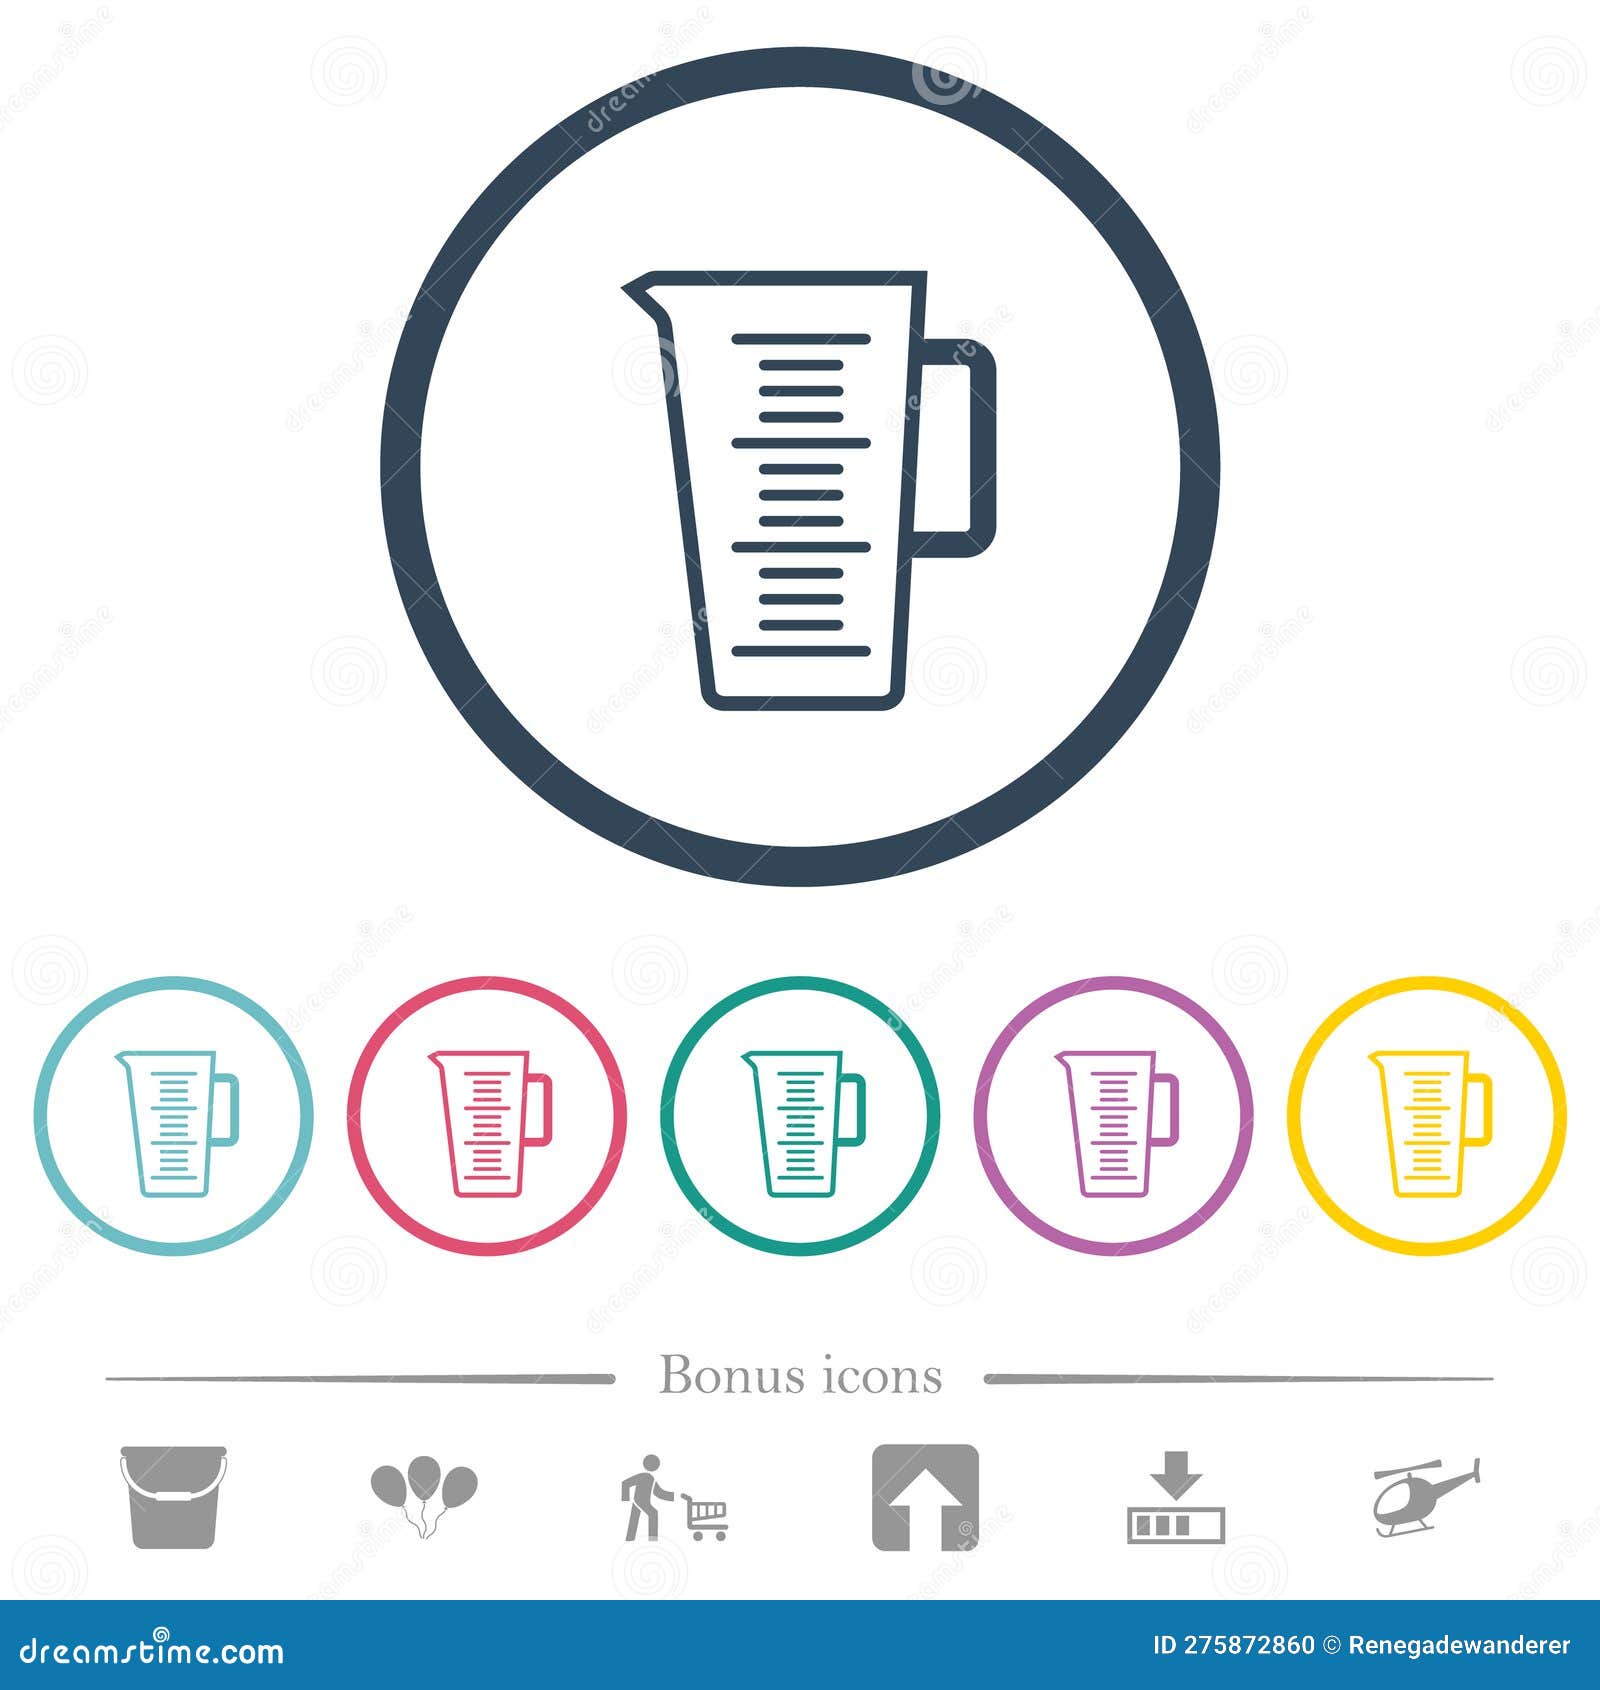 Measuring Cup Outline Flat Color Icons in Round Outlines Stock Vector ...